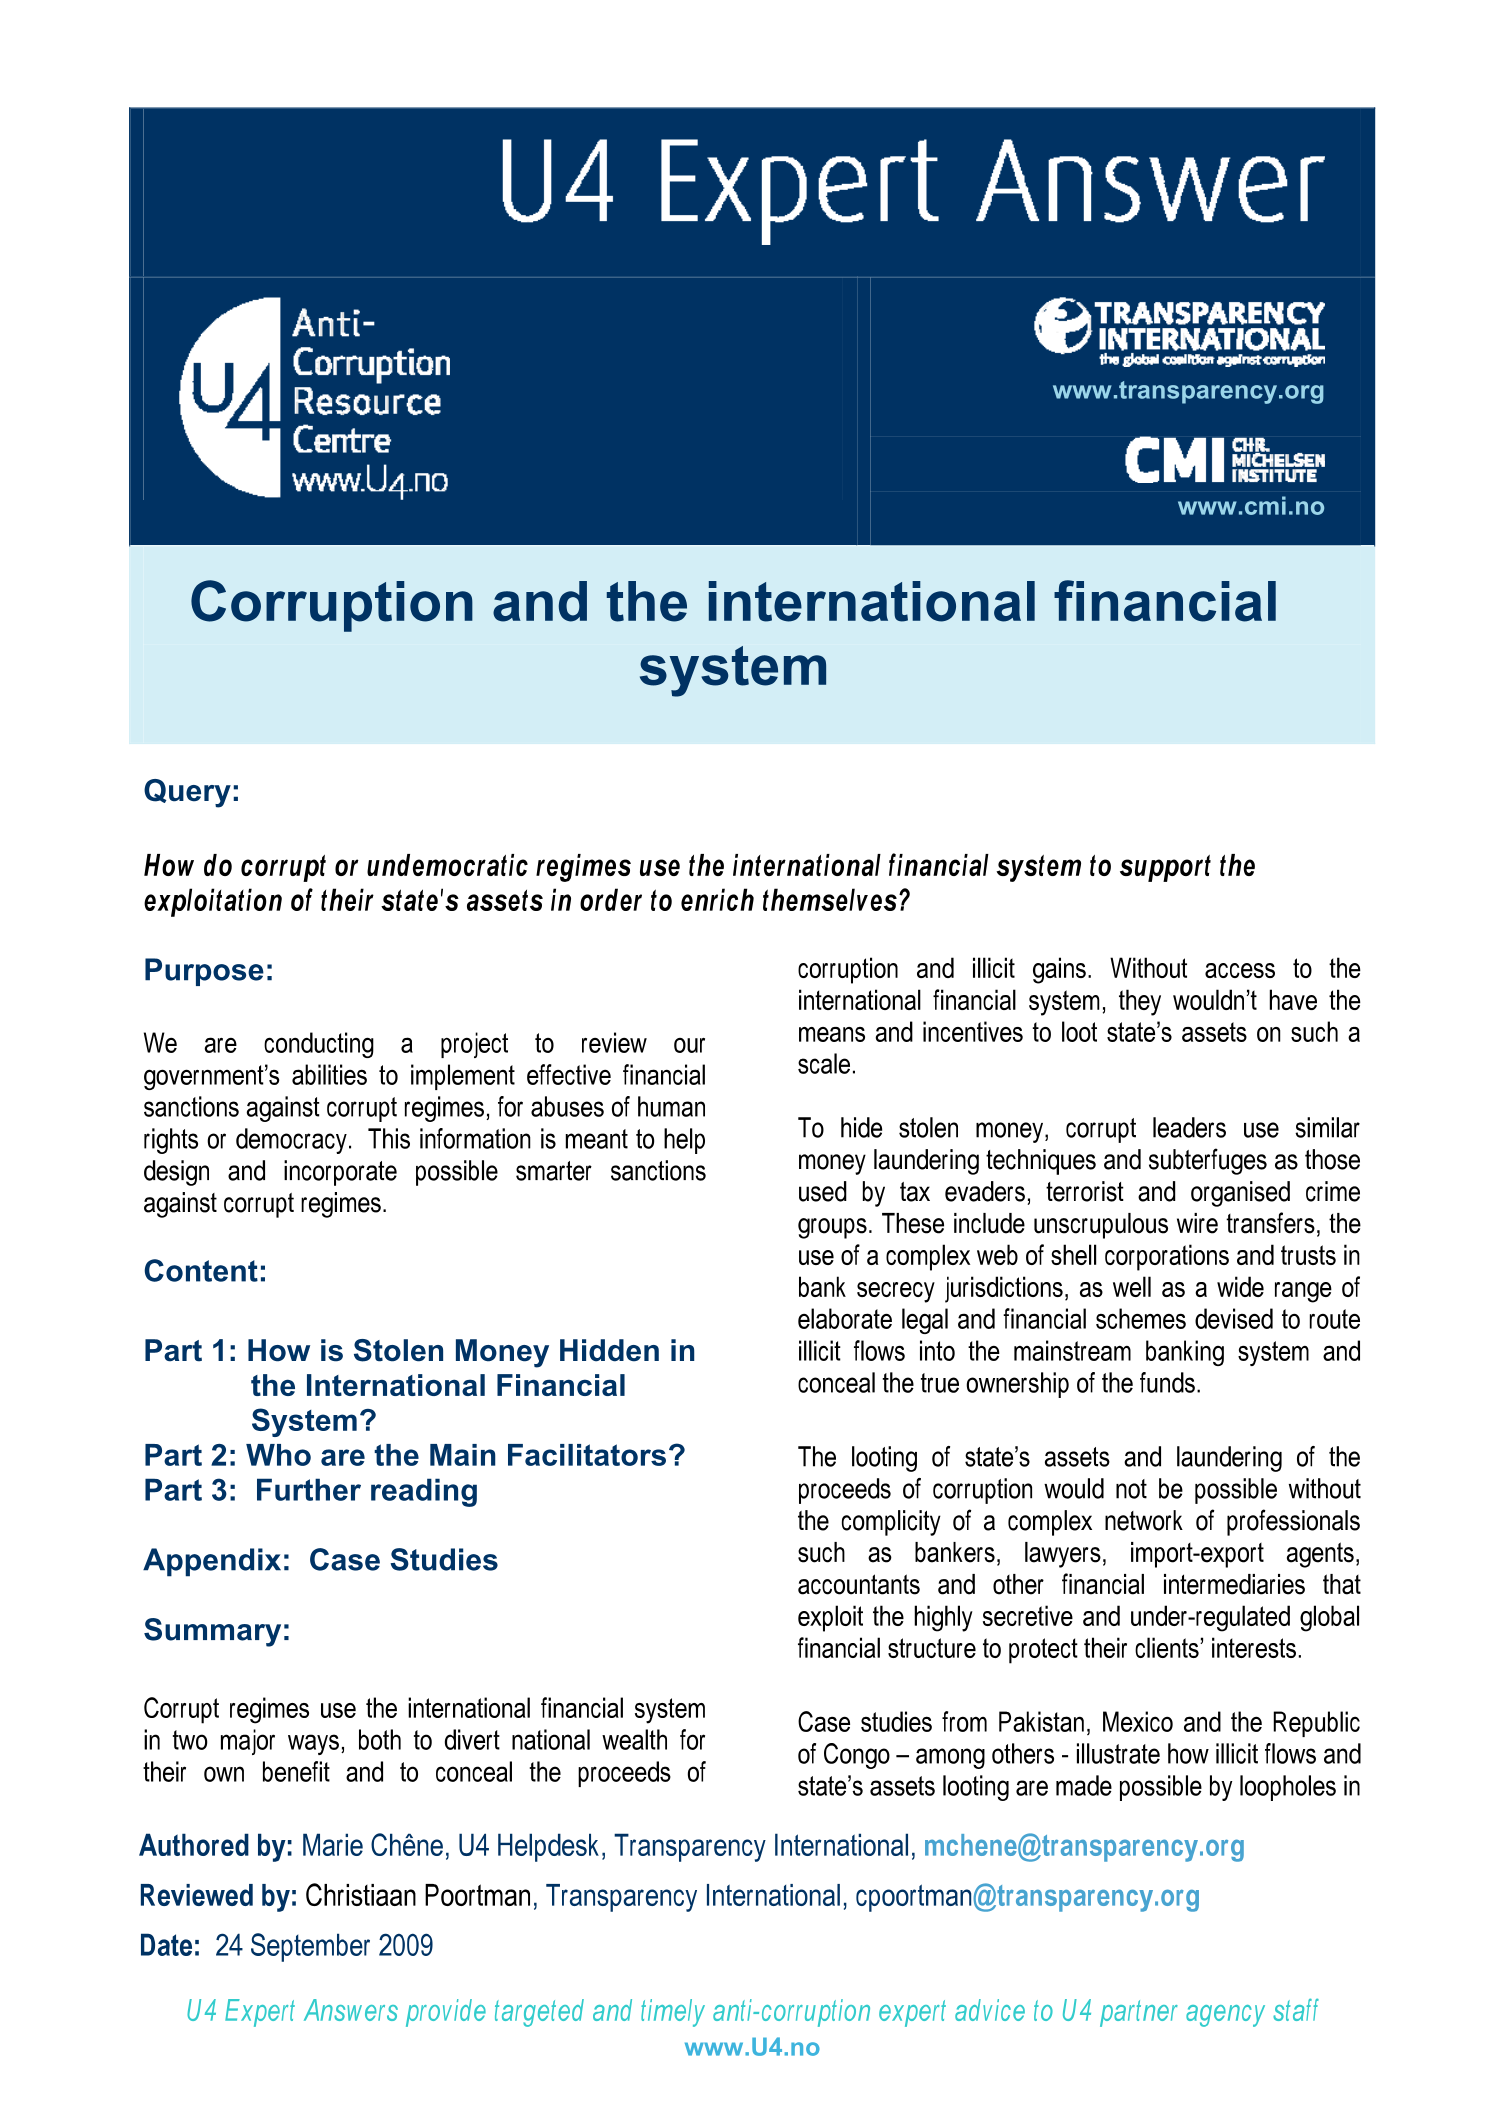 Corruption and the international financial system